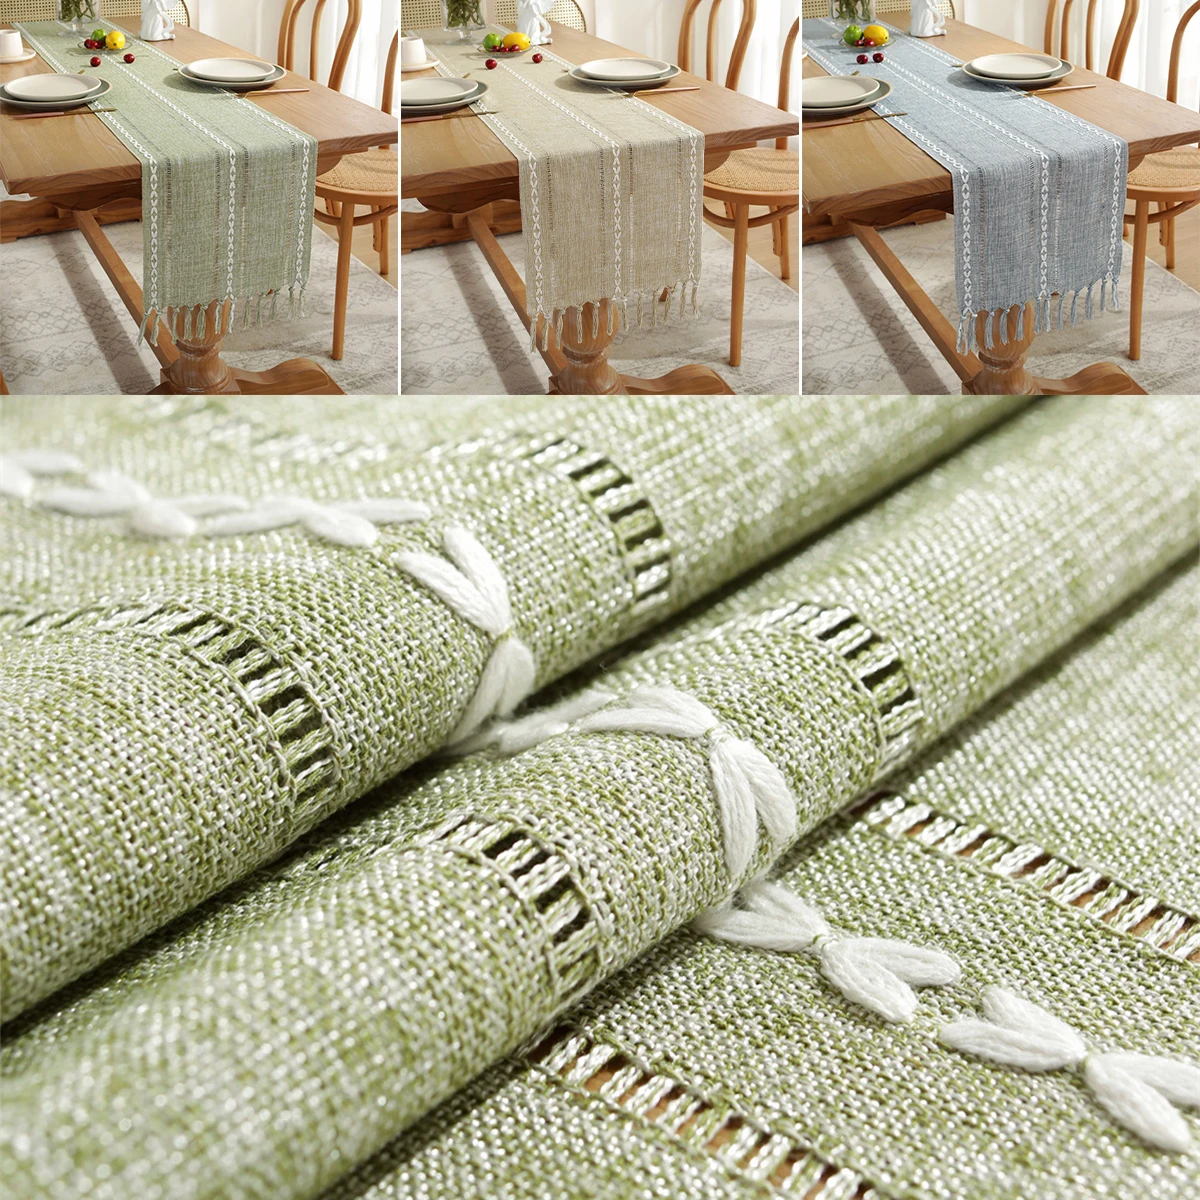 Table Runner with Hand-Tassels Vintage Woven Dresser Scarf Farmhouse Rustic Table Cover Polyester Rectangular Dresser Decor for